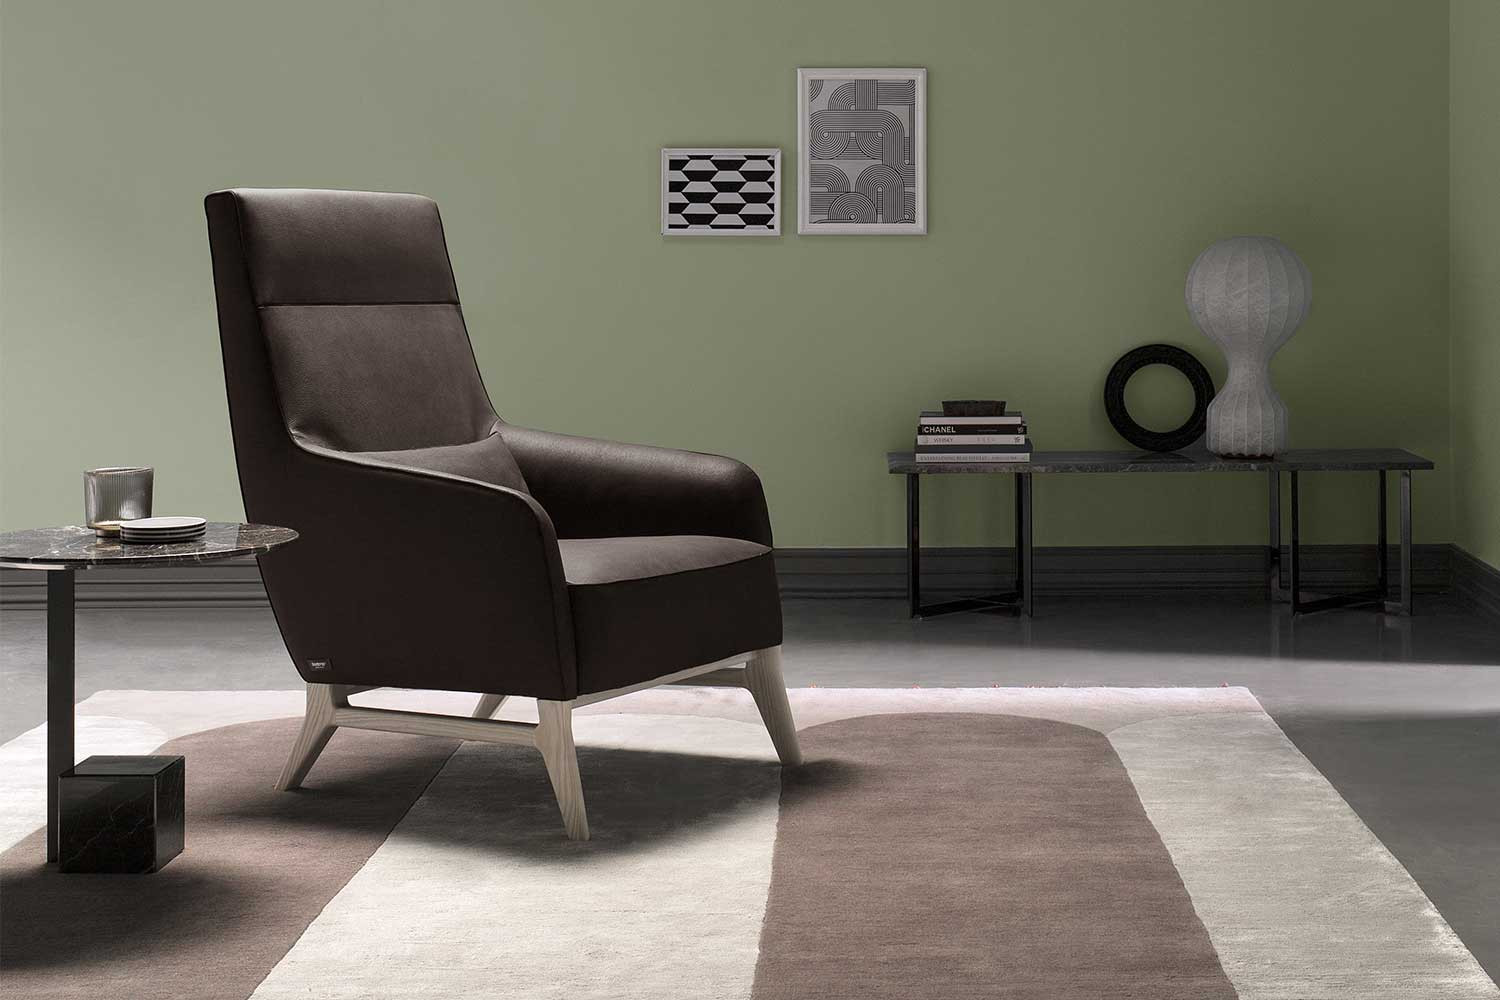 Mid-century inspired designer armchair with ash wood legs and a high or low back